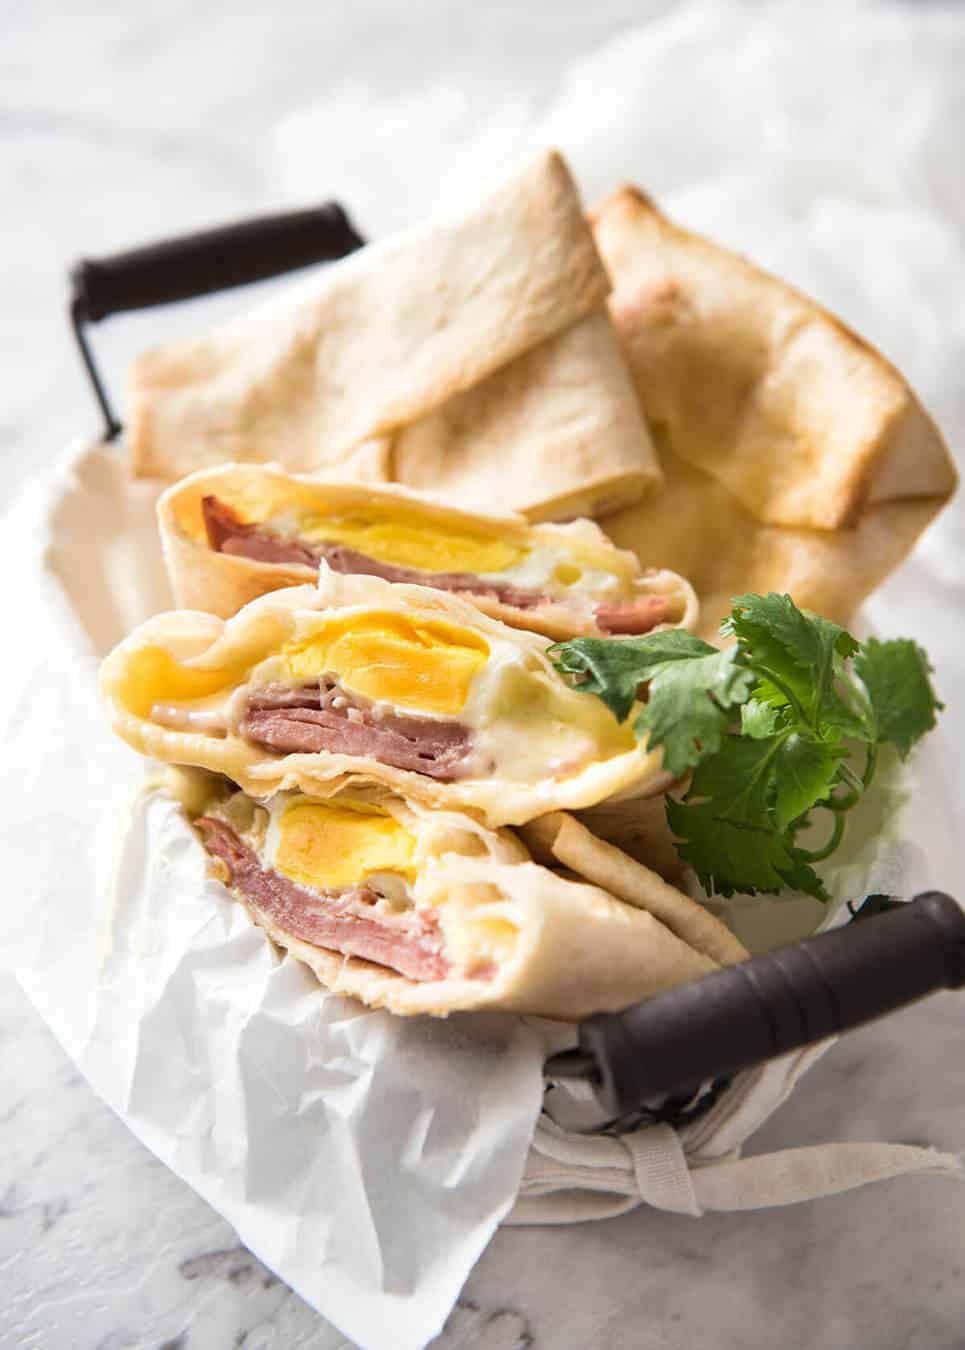 Hot Ham, Egg and Cheese Pockets made with tortillas in a basket, with some cut showing the inside with molten cheese and perfectly cooked egg.